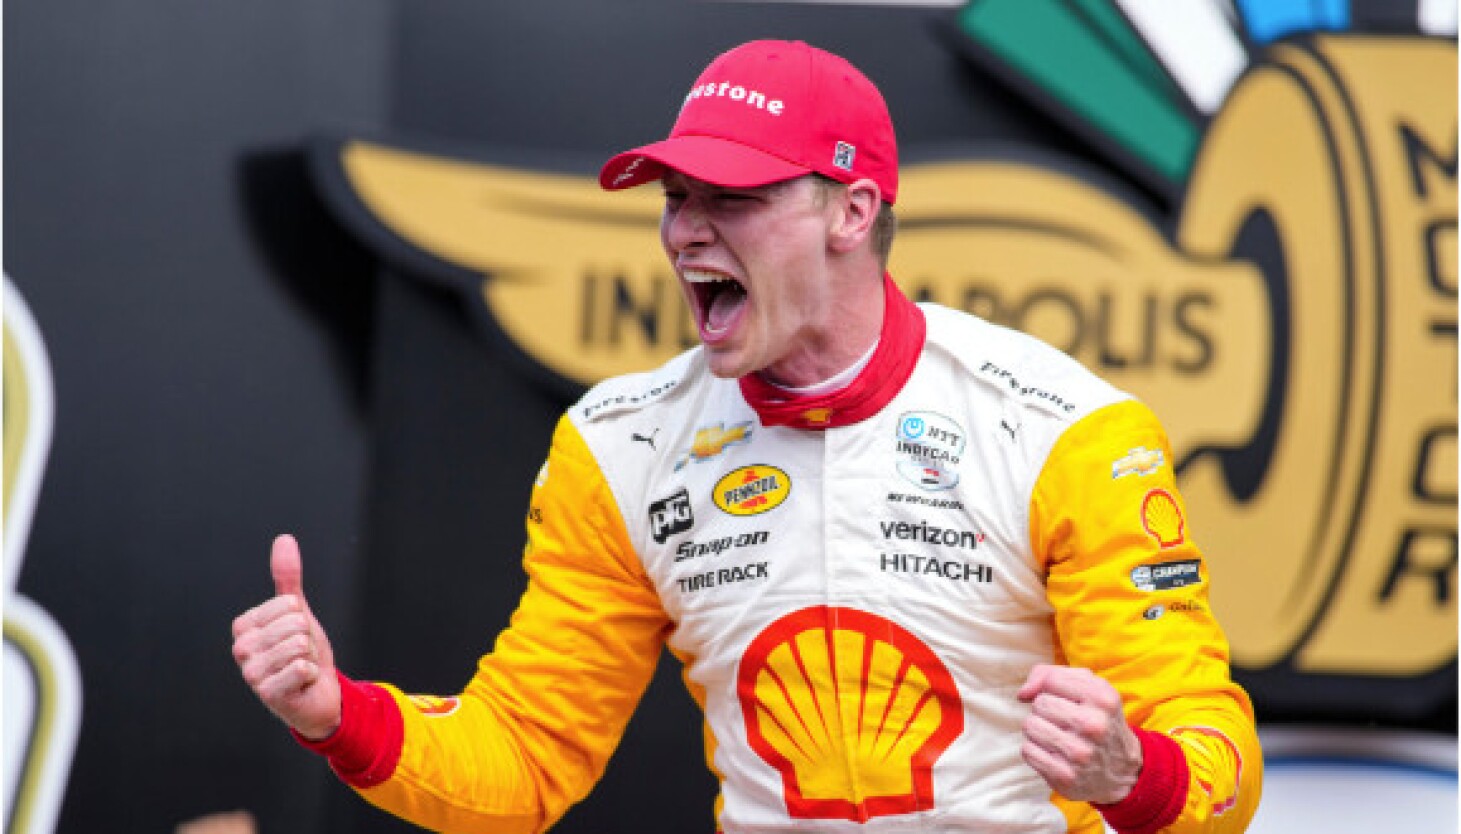 Daring pass helps Josef Newgarden win Indianapolis 500 for first time